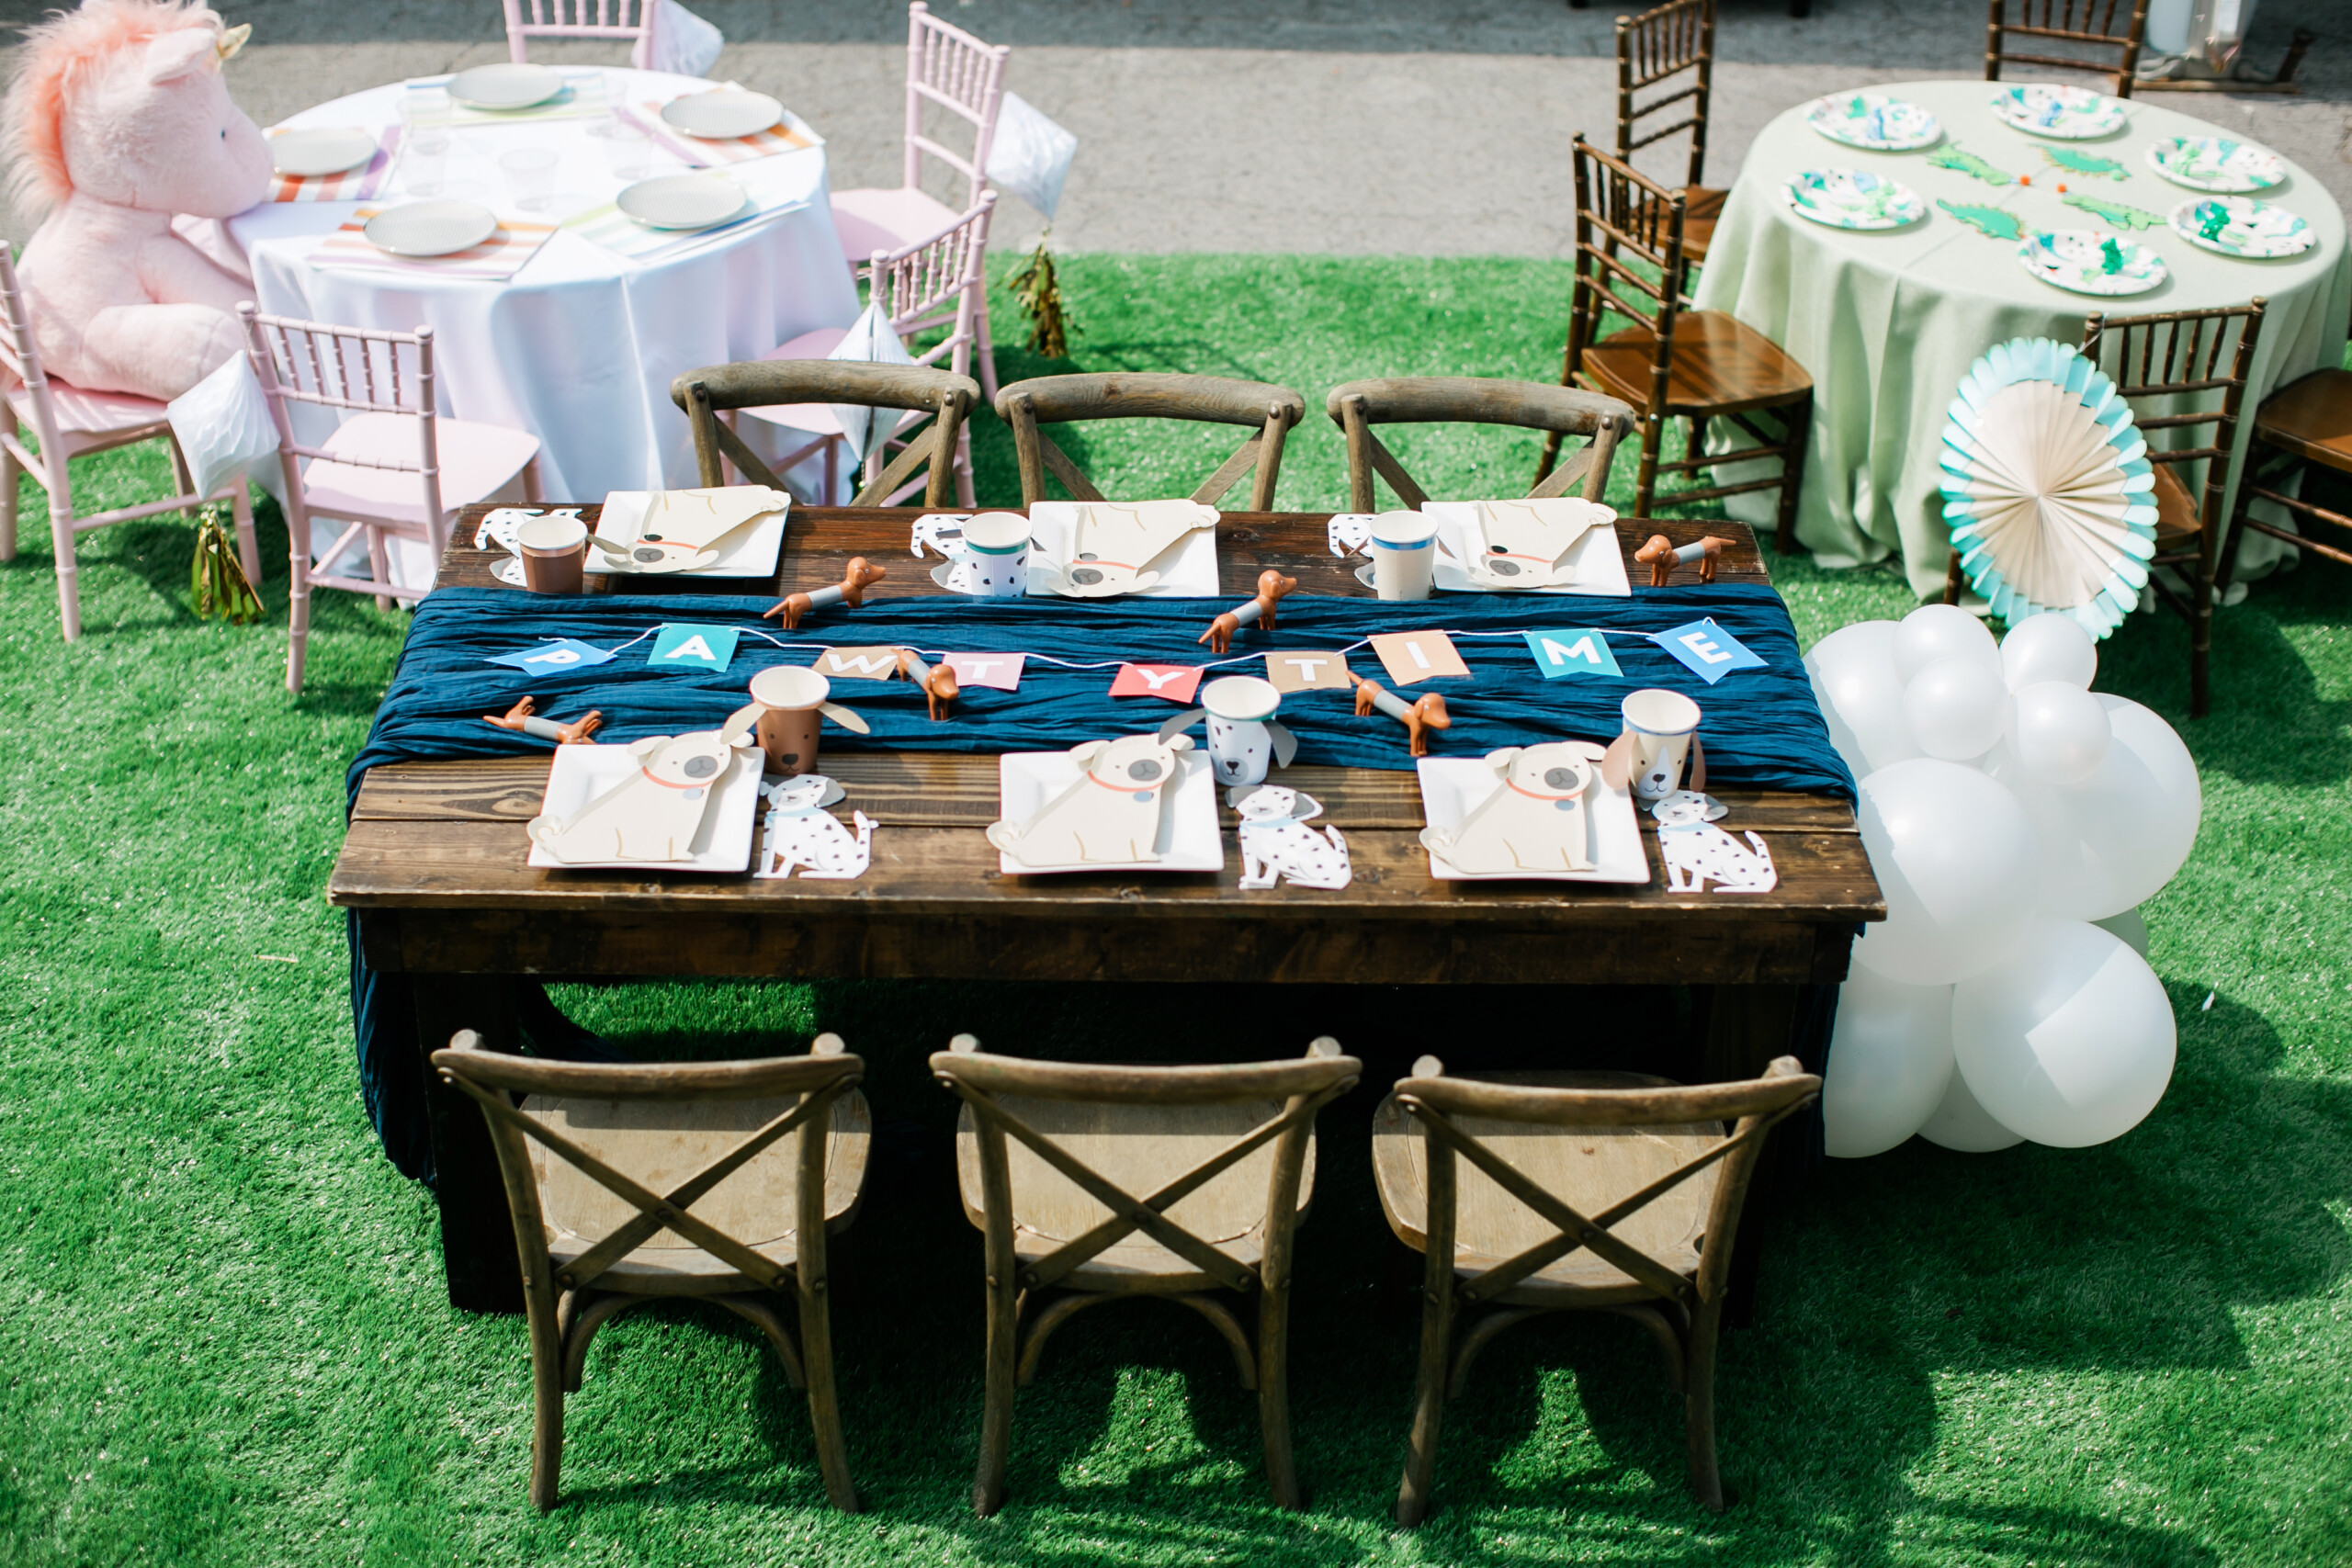 Favorite Rental Items for an Elevated Outdoor Kids Birthday Party